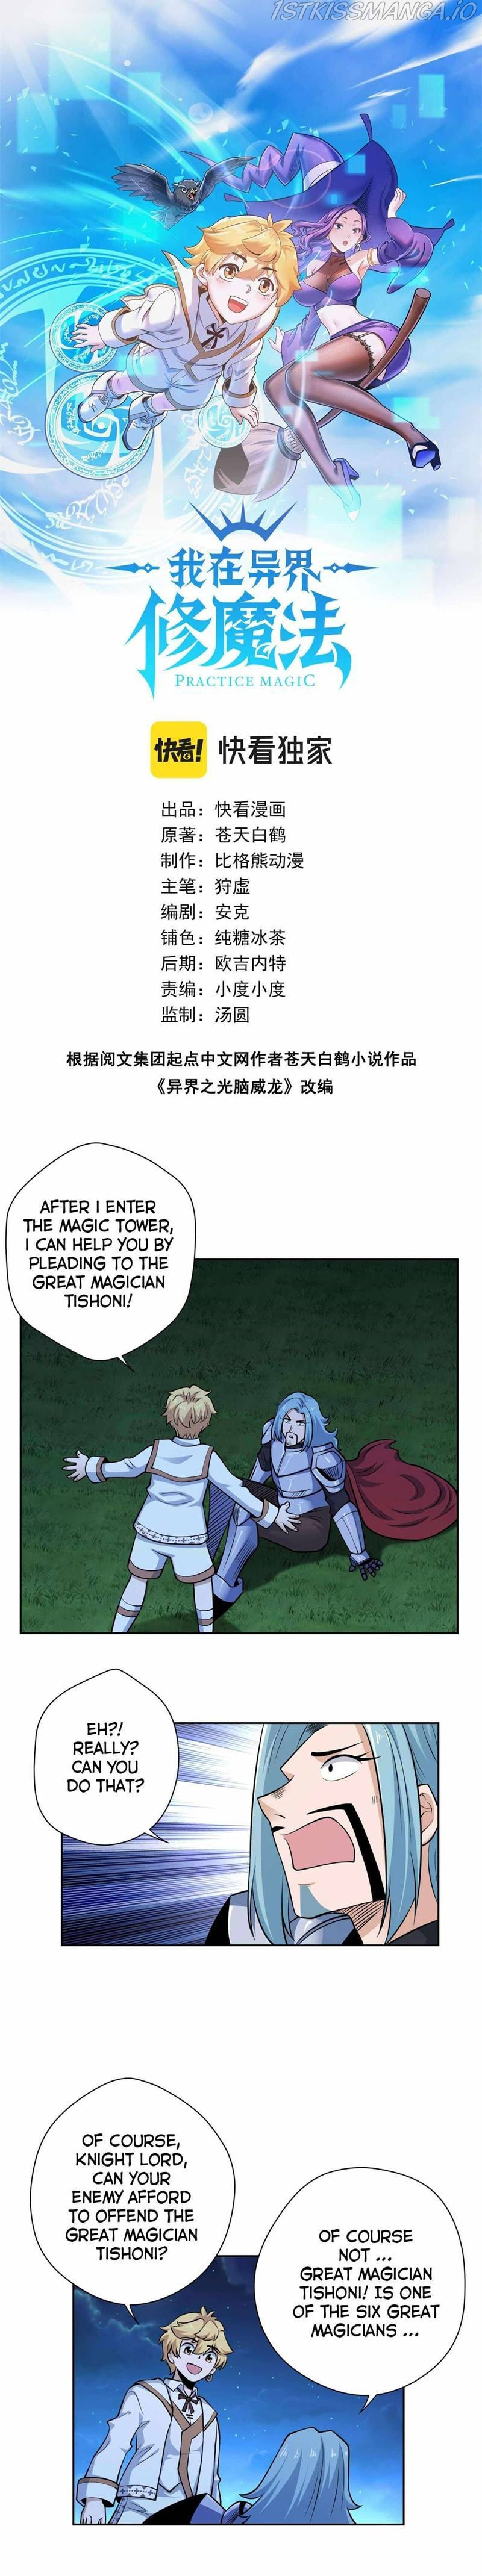 Learning Magic In Another World - Page 1